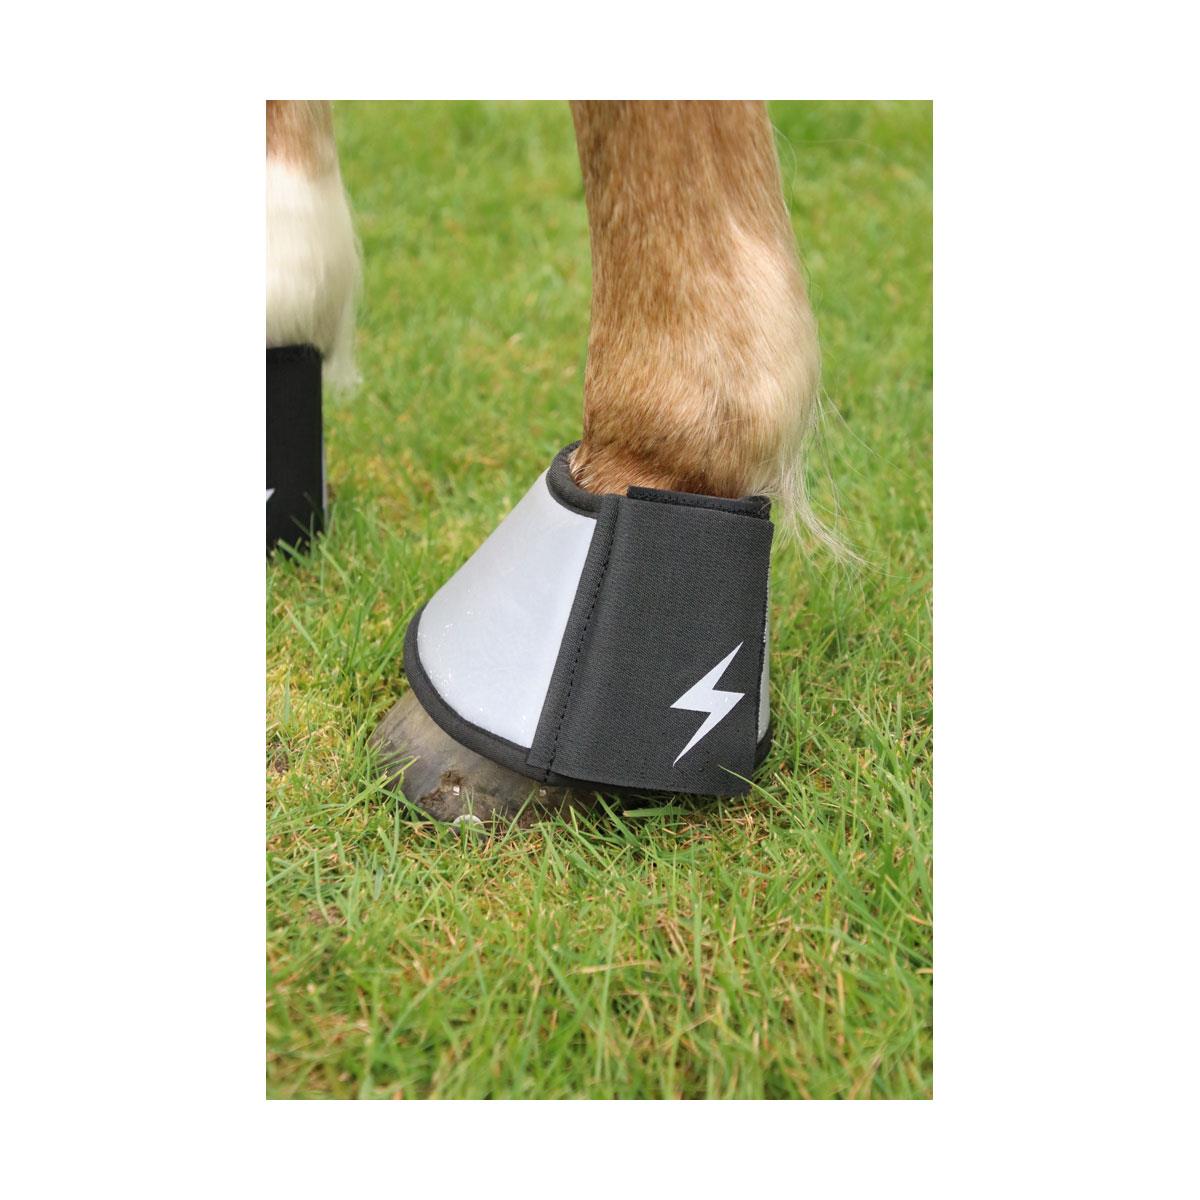 Silva Flash Over Reach Boots by Hy Equestrian - Just Horse Riders